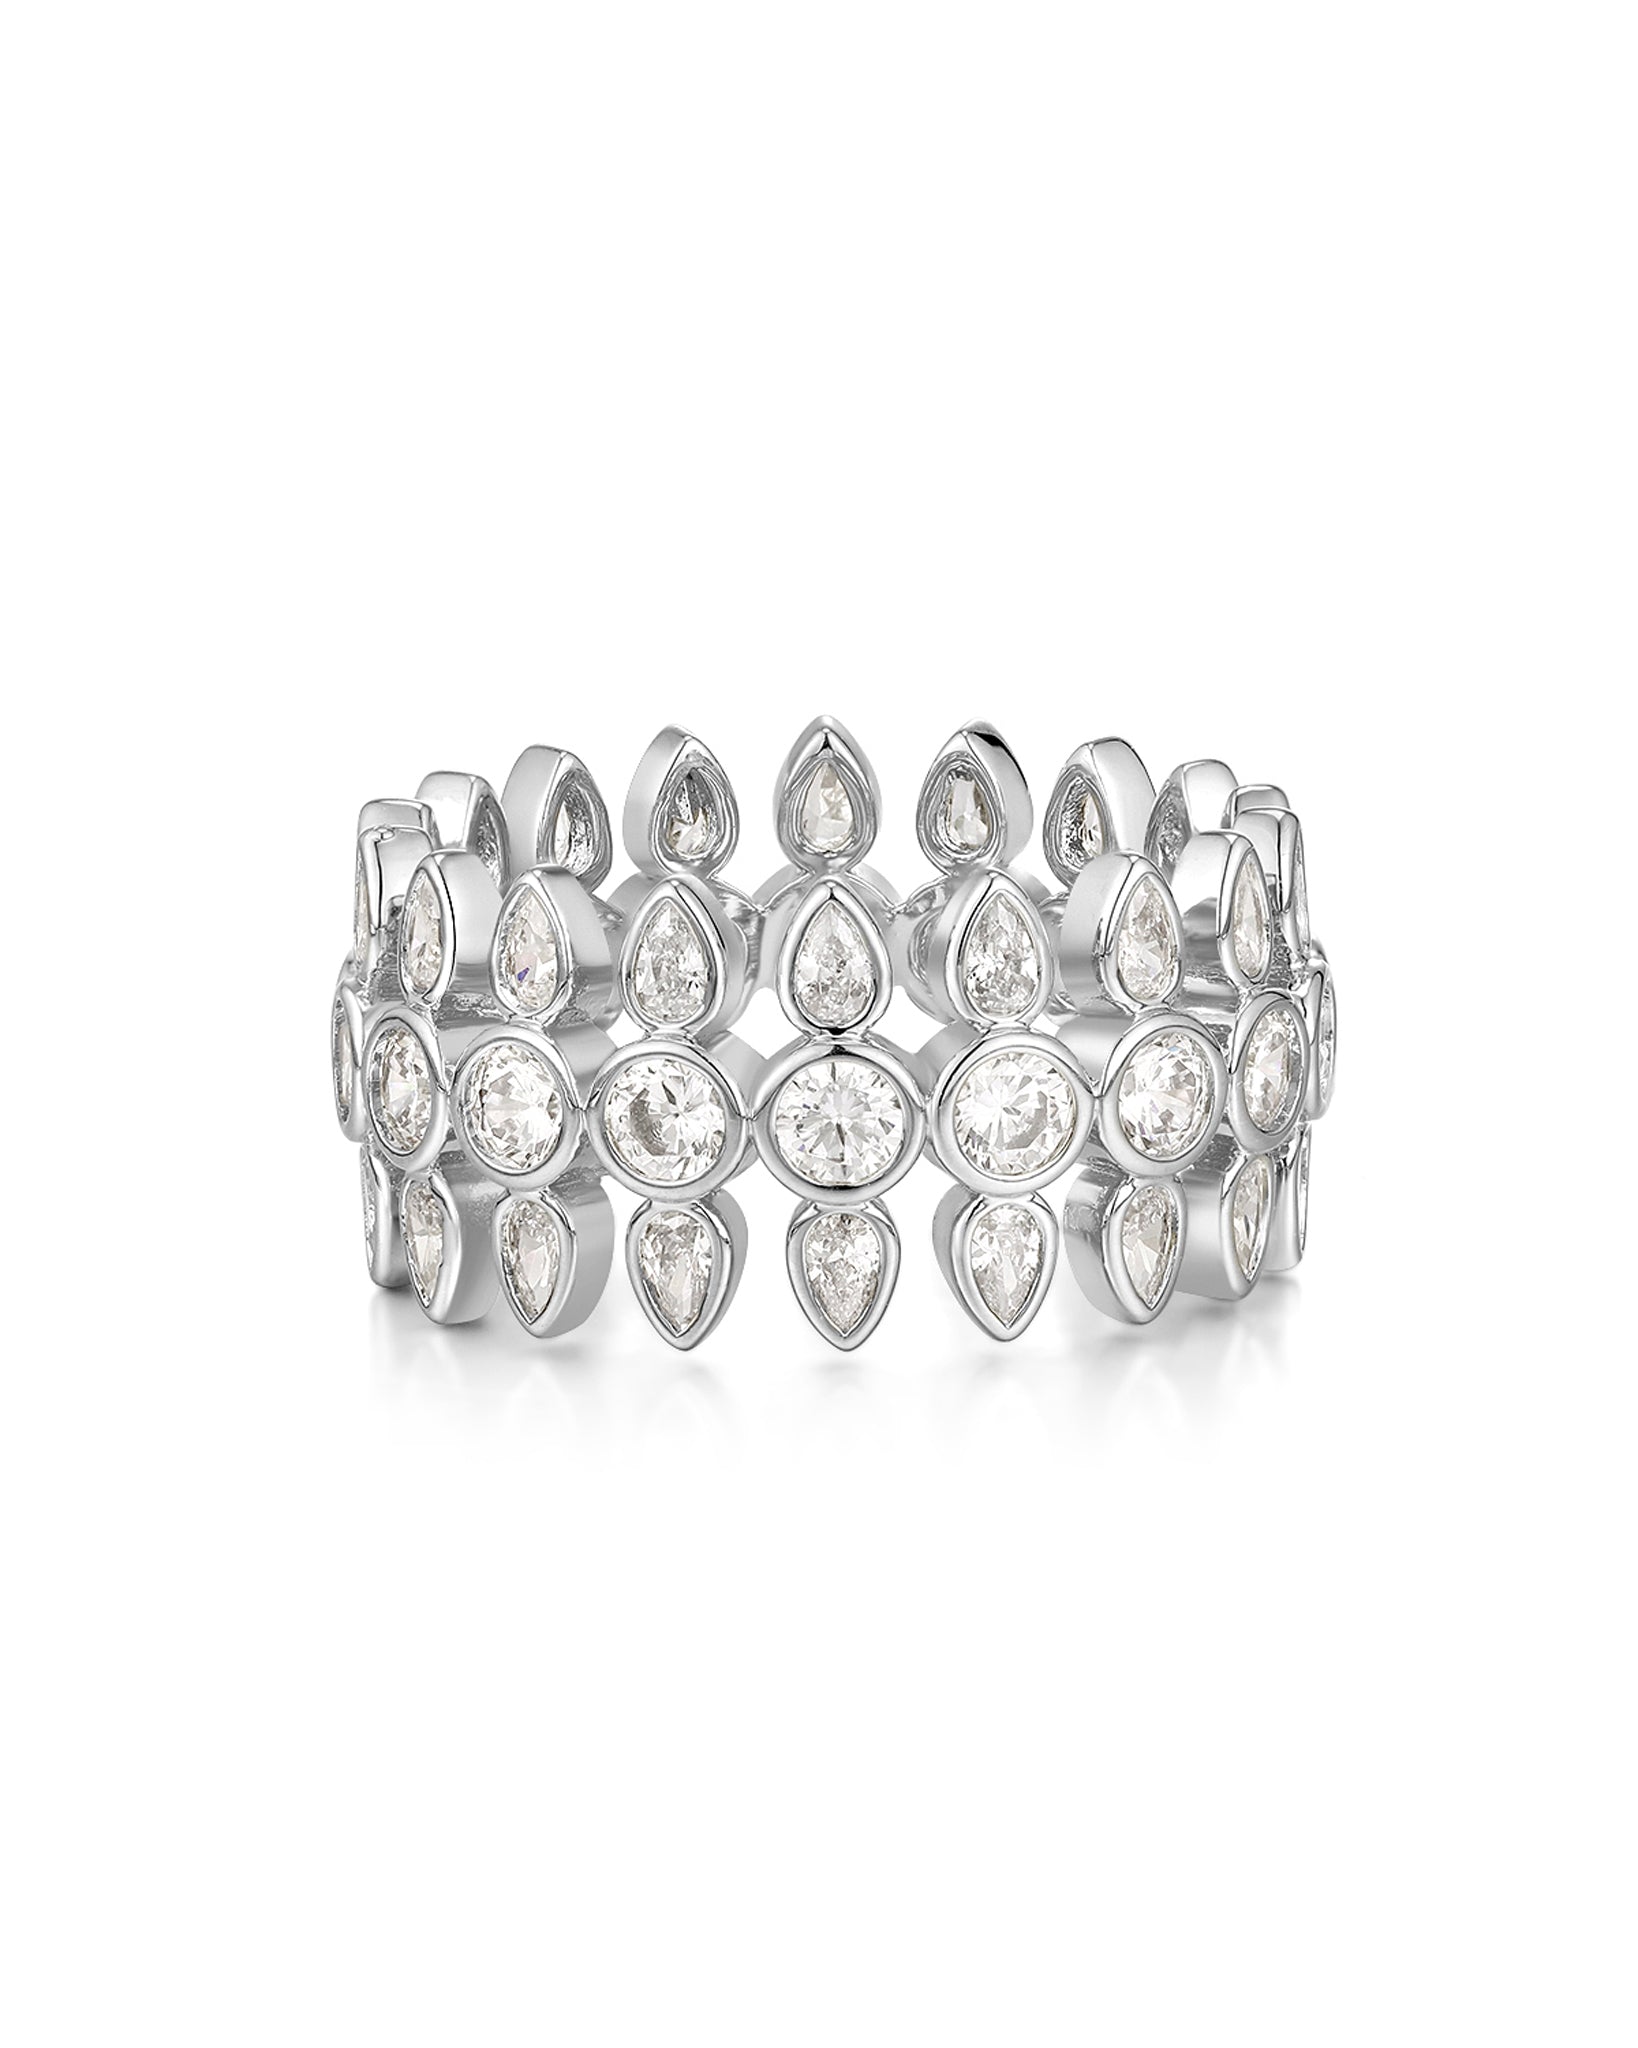 Luv Aj Florette Band Ring in CZ and Polished Rhodium Plated Size 5